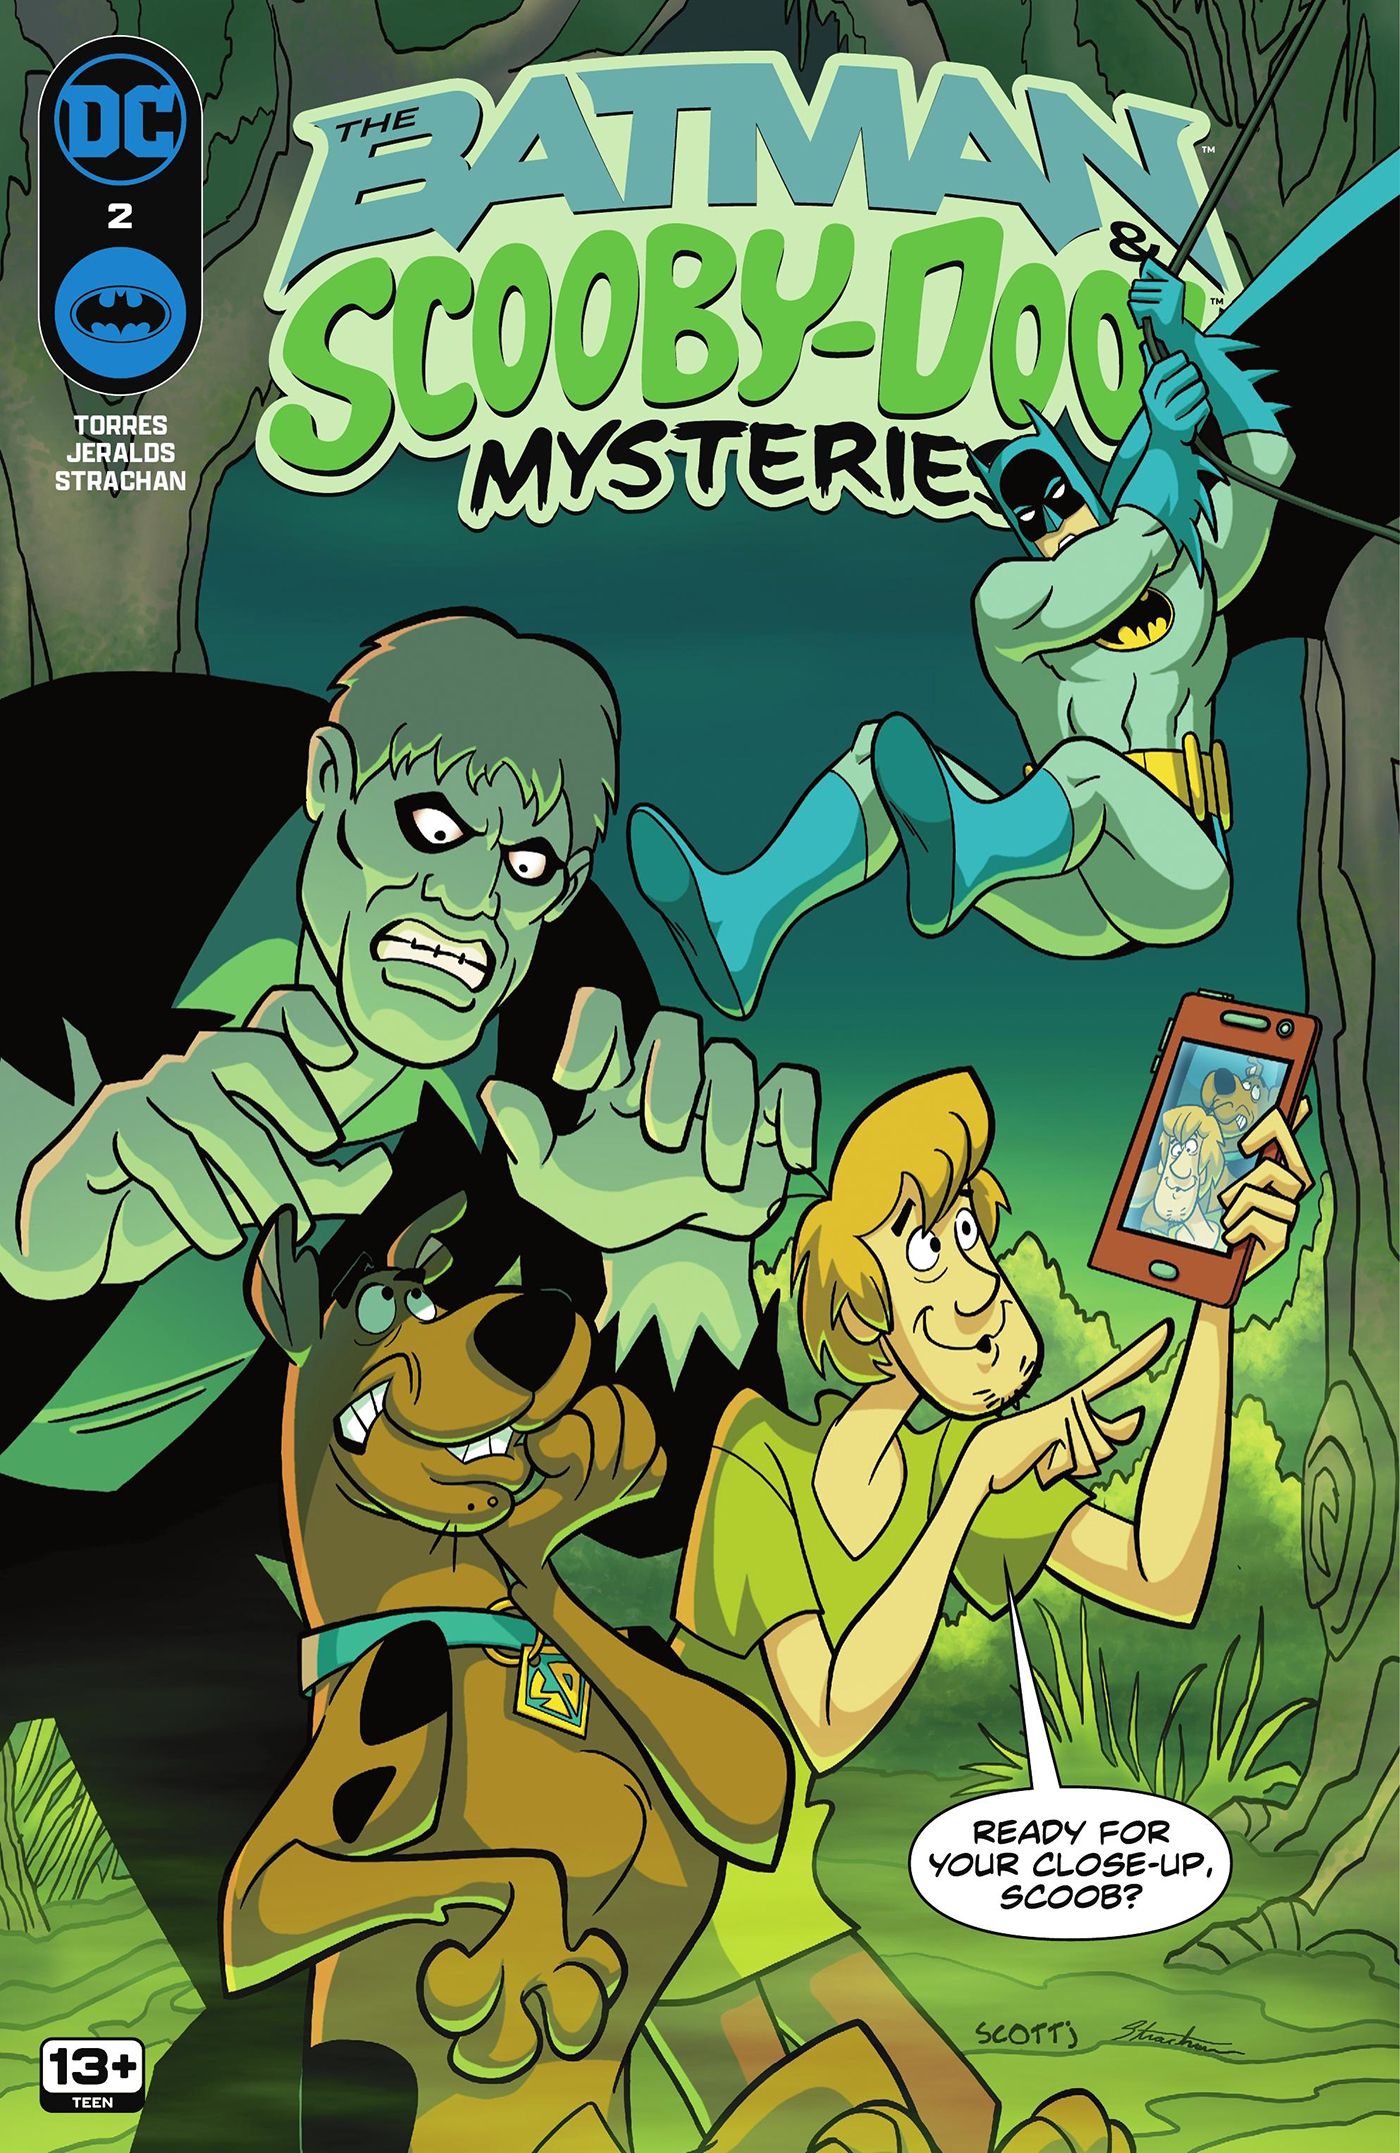 The Batman & Scooby-Doo Mysteries #2 Cover by Scott Jeralds. Solomon Grundy photobombs Shaggy and Scooby's selfie